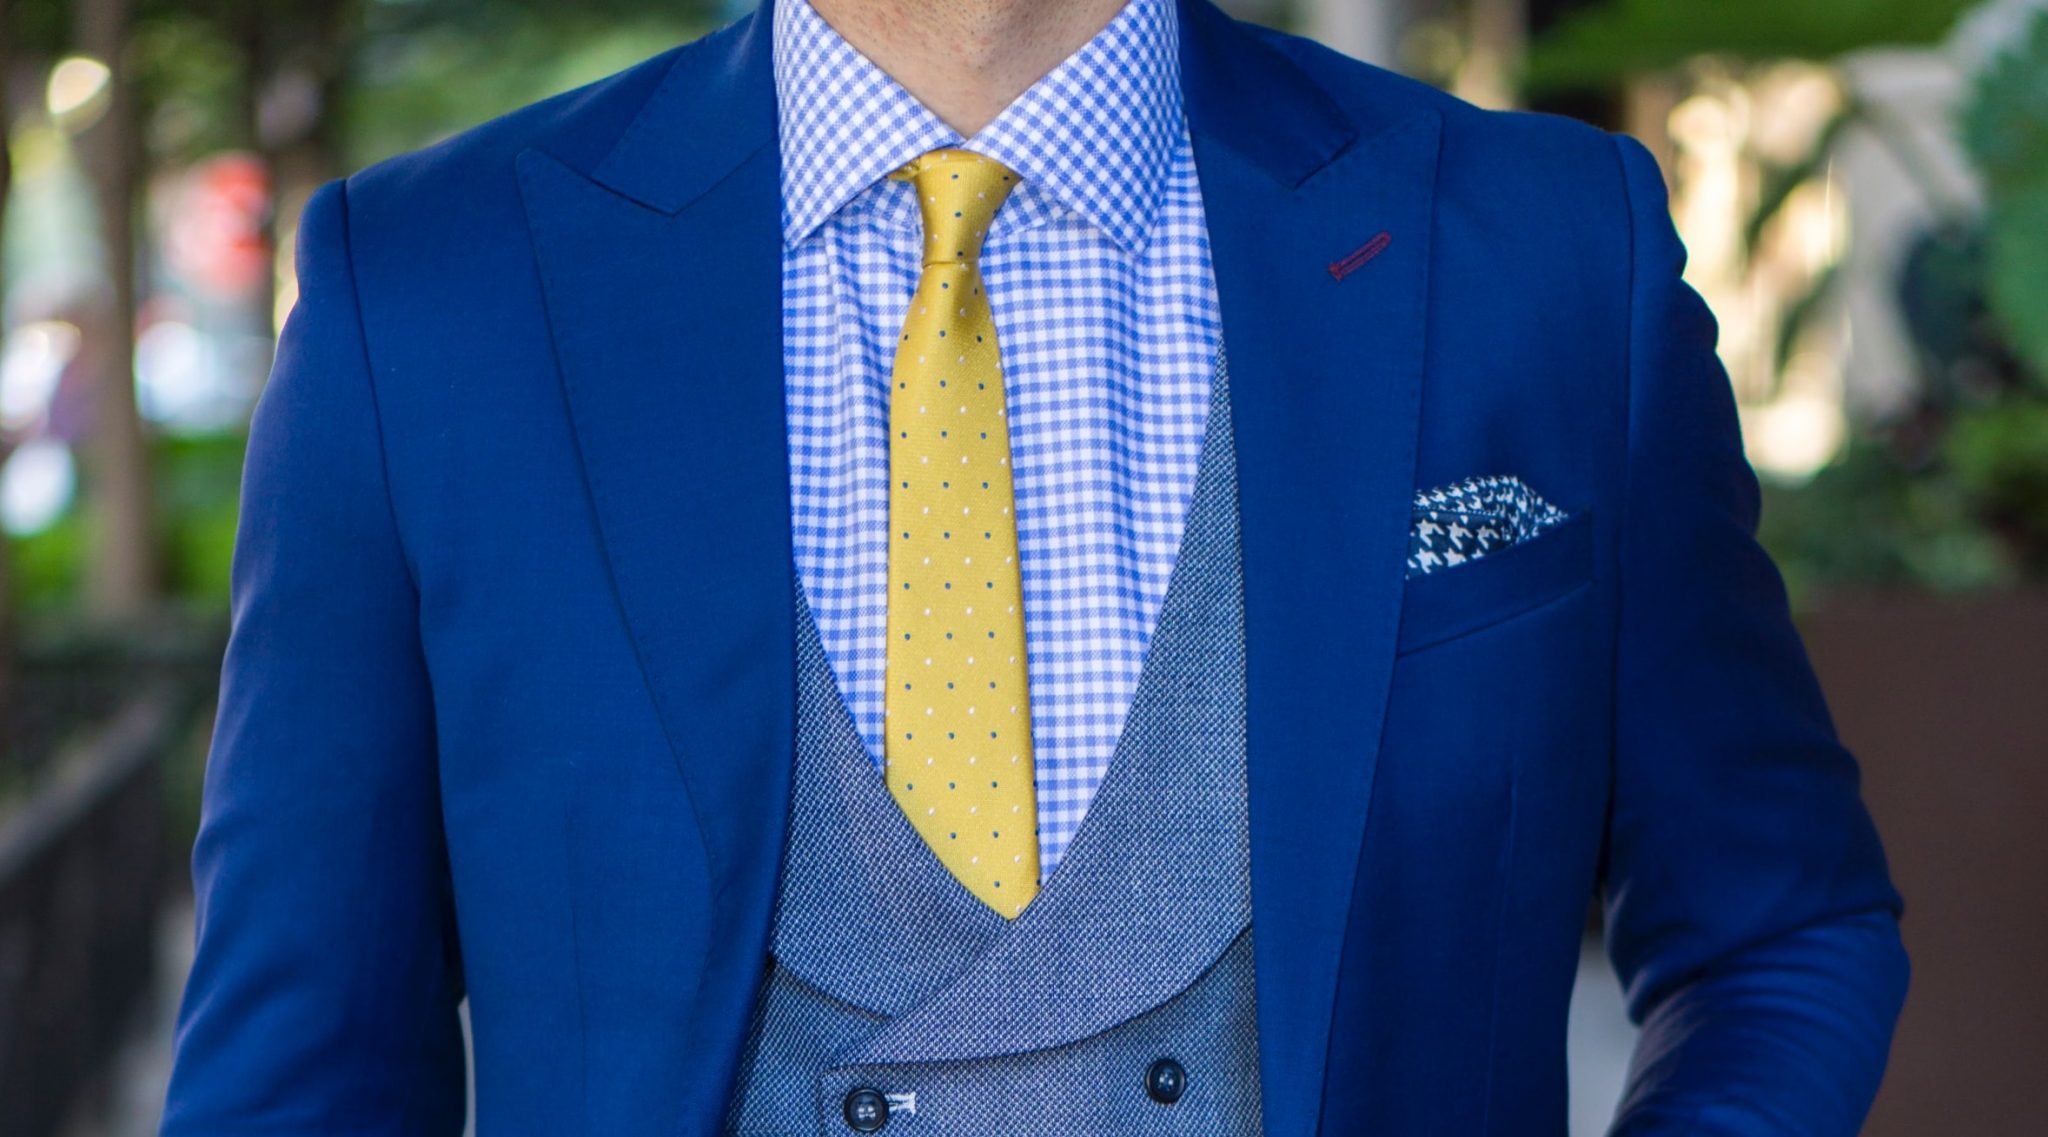 Should you match your tie and pocket square? - Adamley